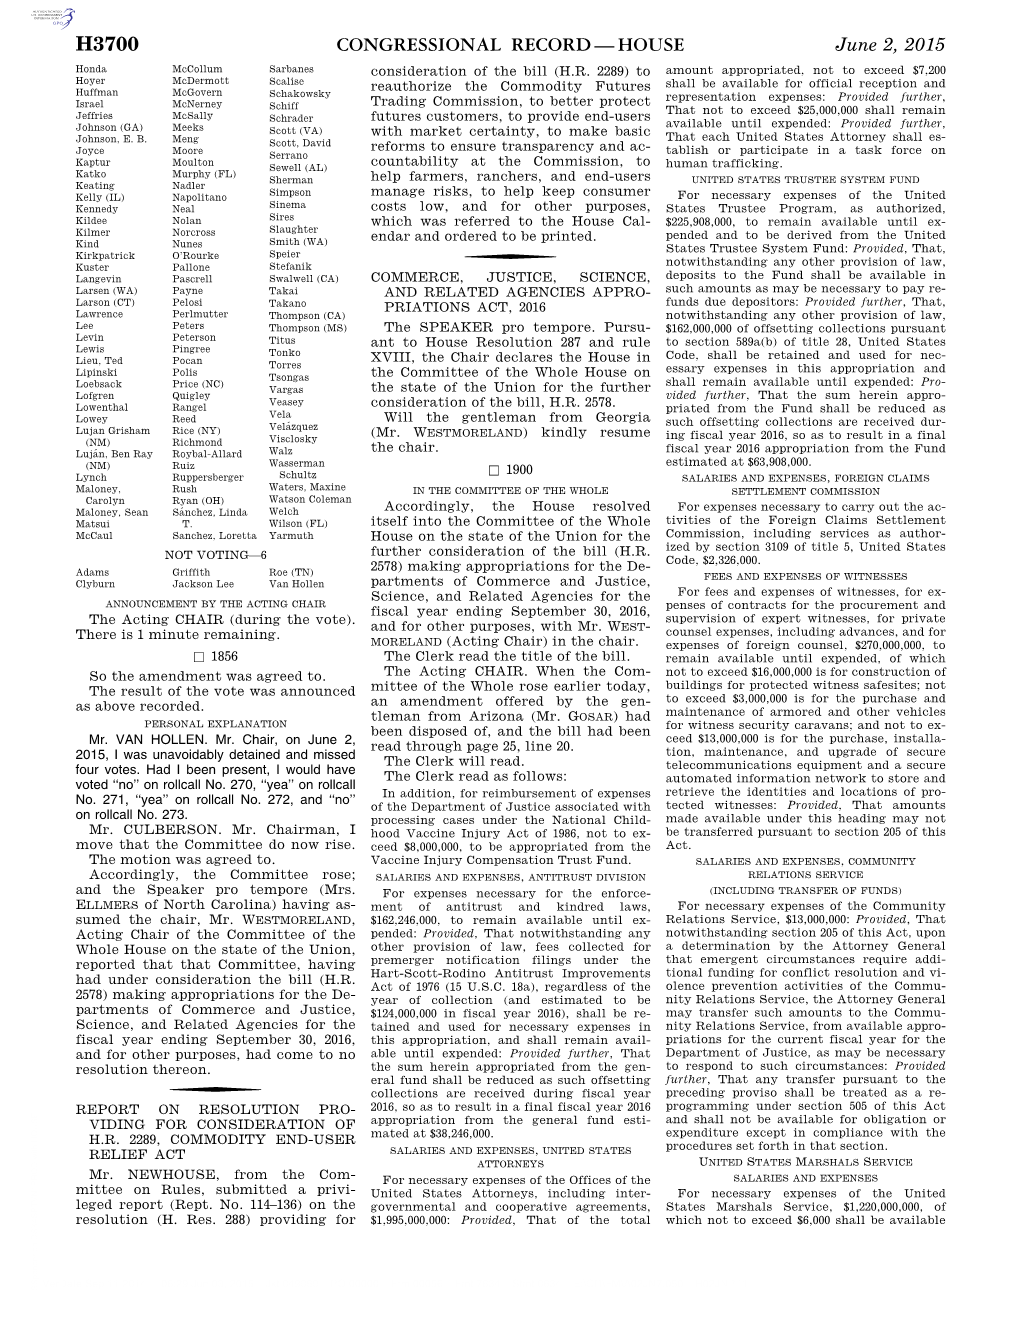 Congressional Record—House H3700